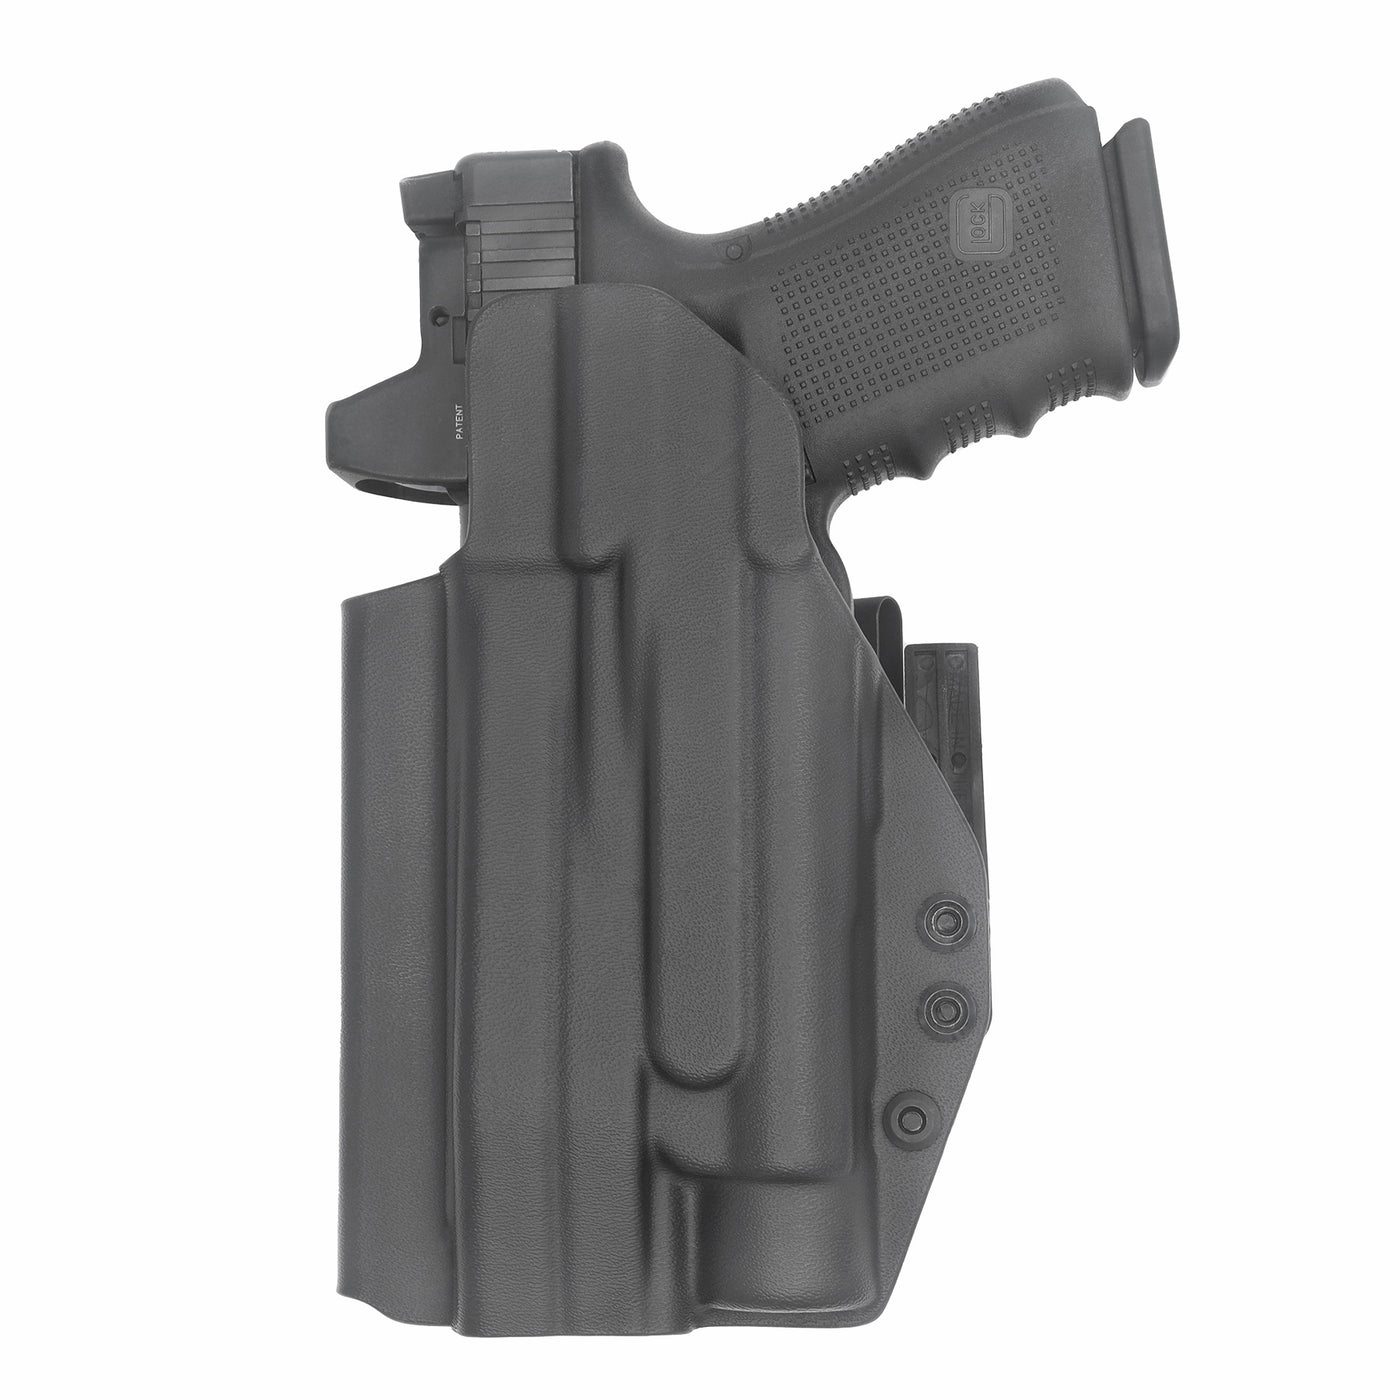 C&G Holsters quickship IWB Tactical ALPHA UPGRADE Glock 20/21 Streamlight TLR1 in holstered position back view